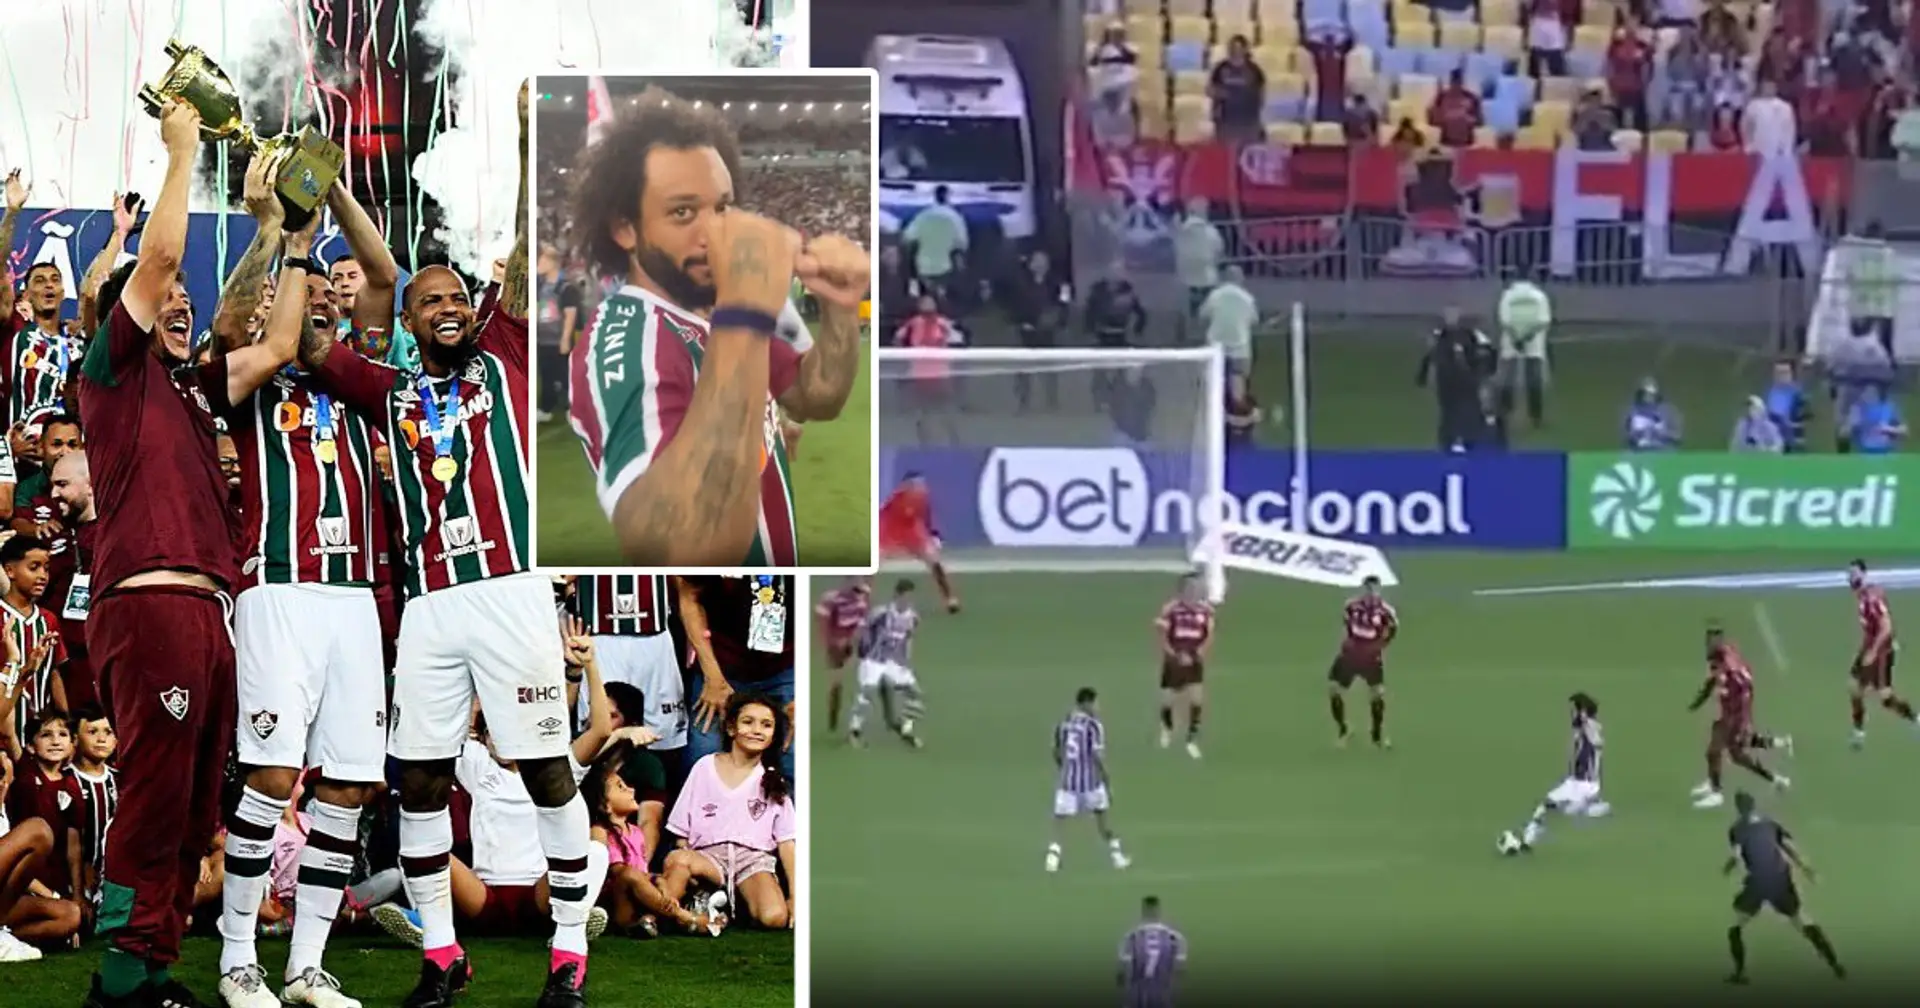 Marcelo makes dream return to Brazil as he scores in final and brings boyhood club to trophy (video)